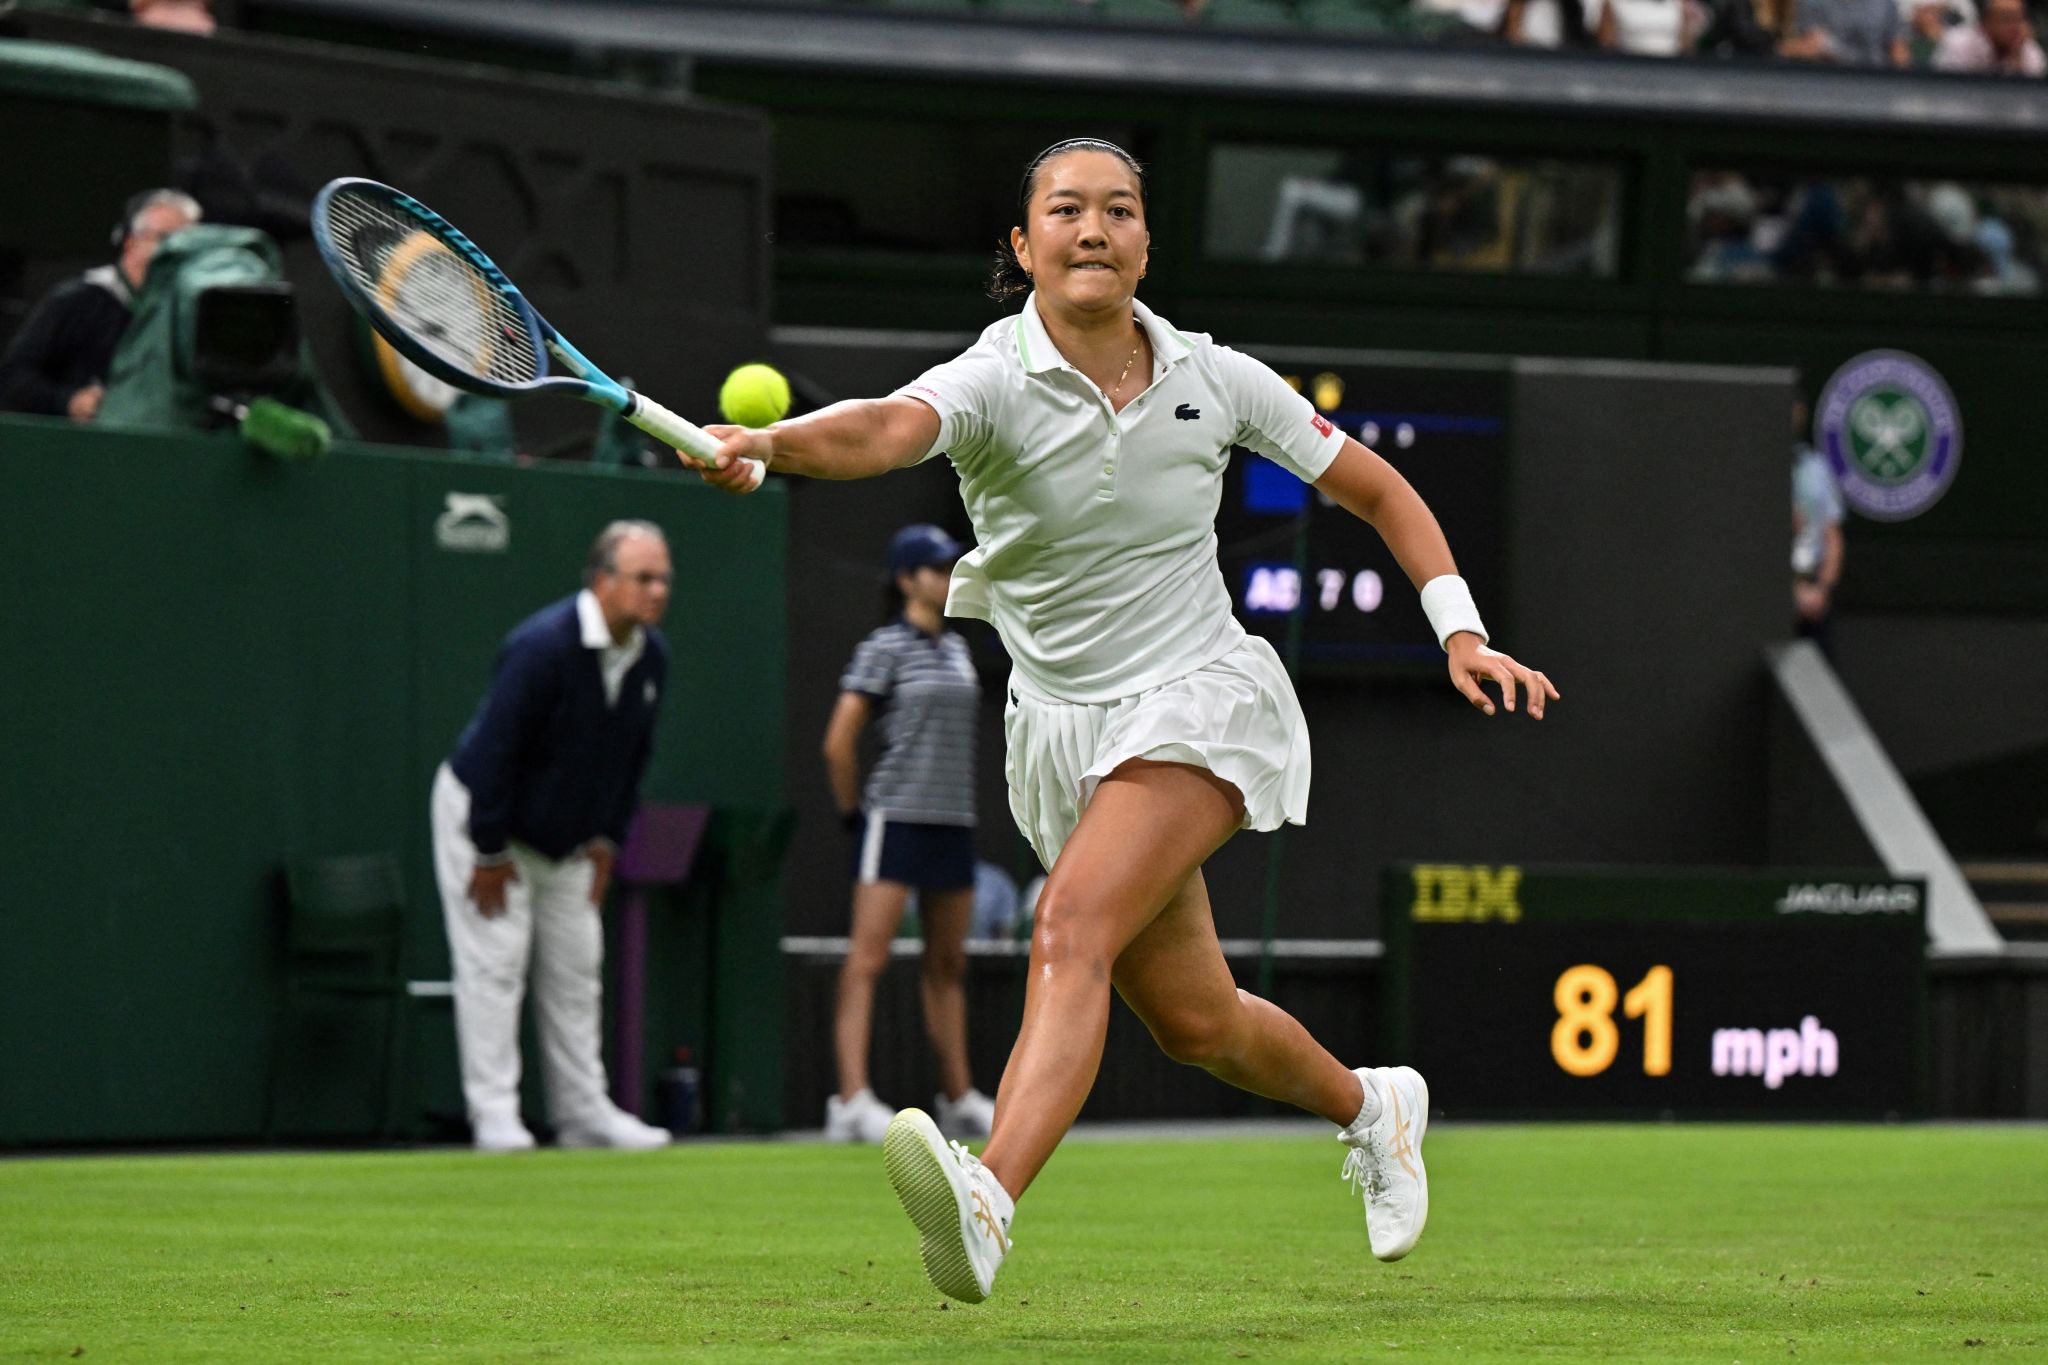 Wimbledon 2022 LIVE: Rusty Serena Williams crashes OUT from Wimbledon, loses to 115-ranked Harmony Tan in FIRST-ROUND: Check Highlights